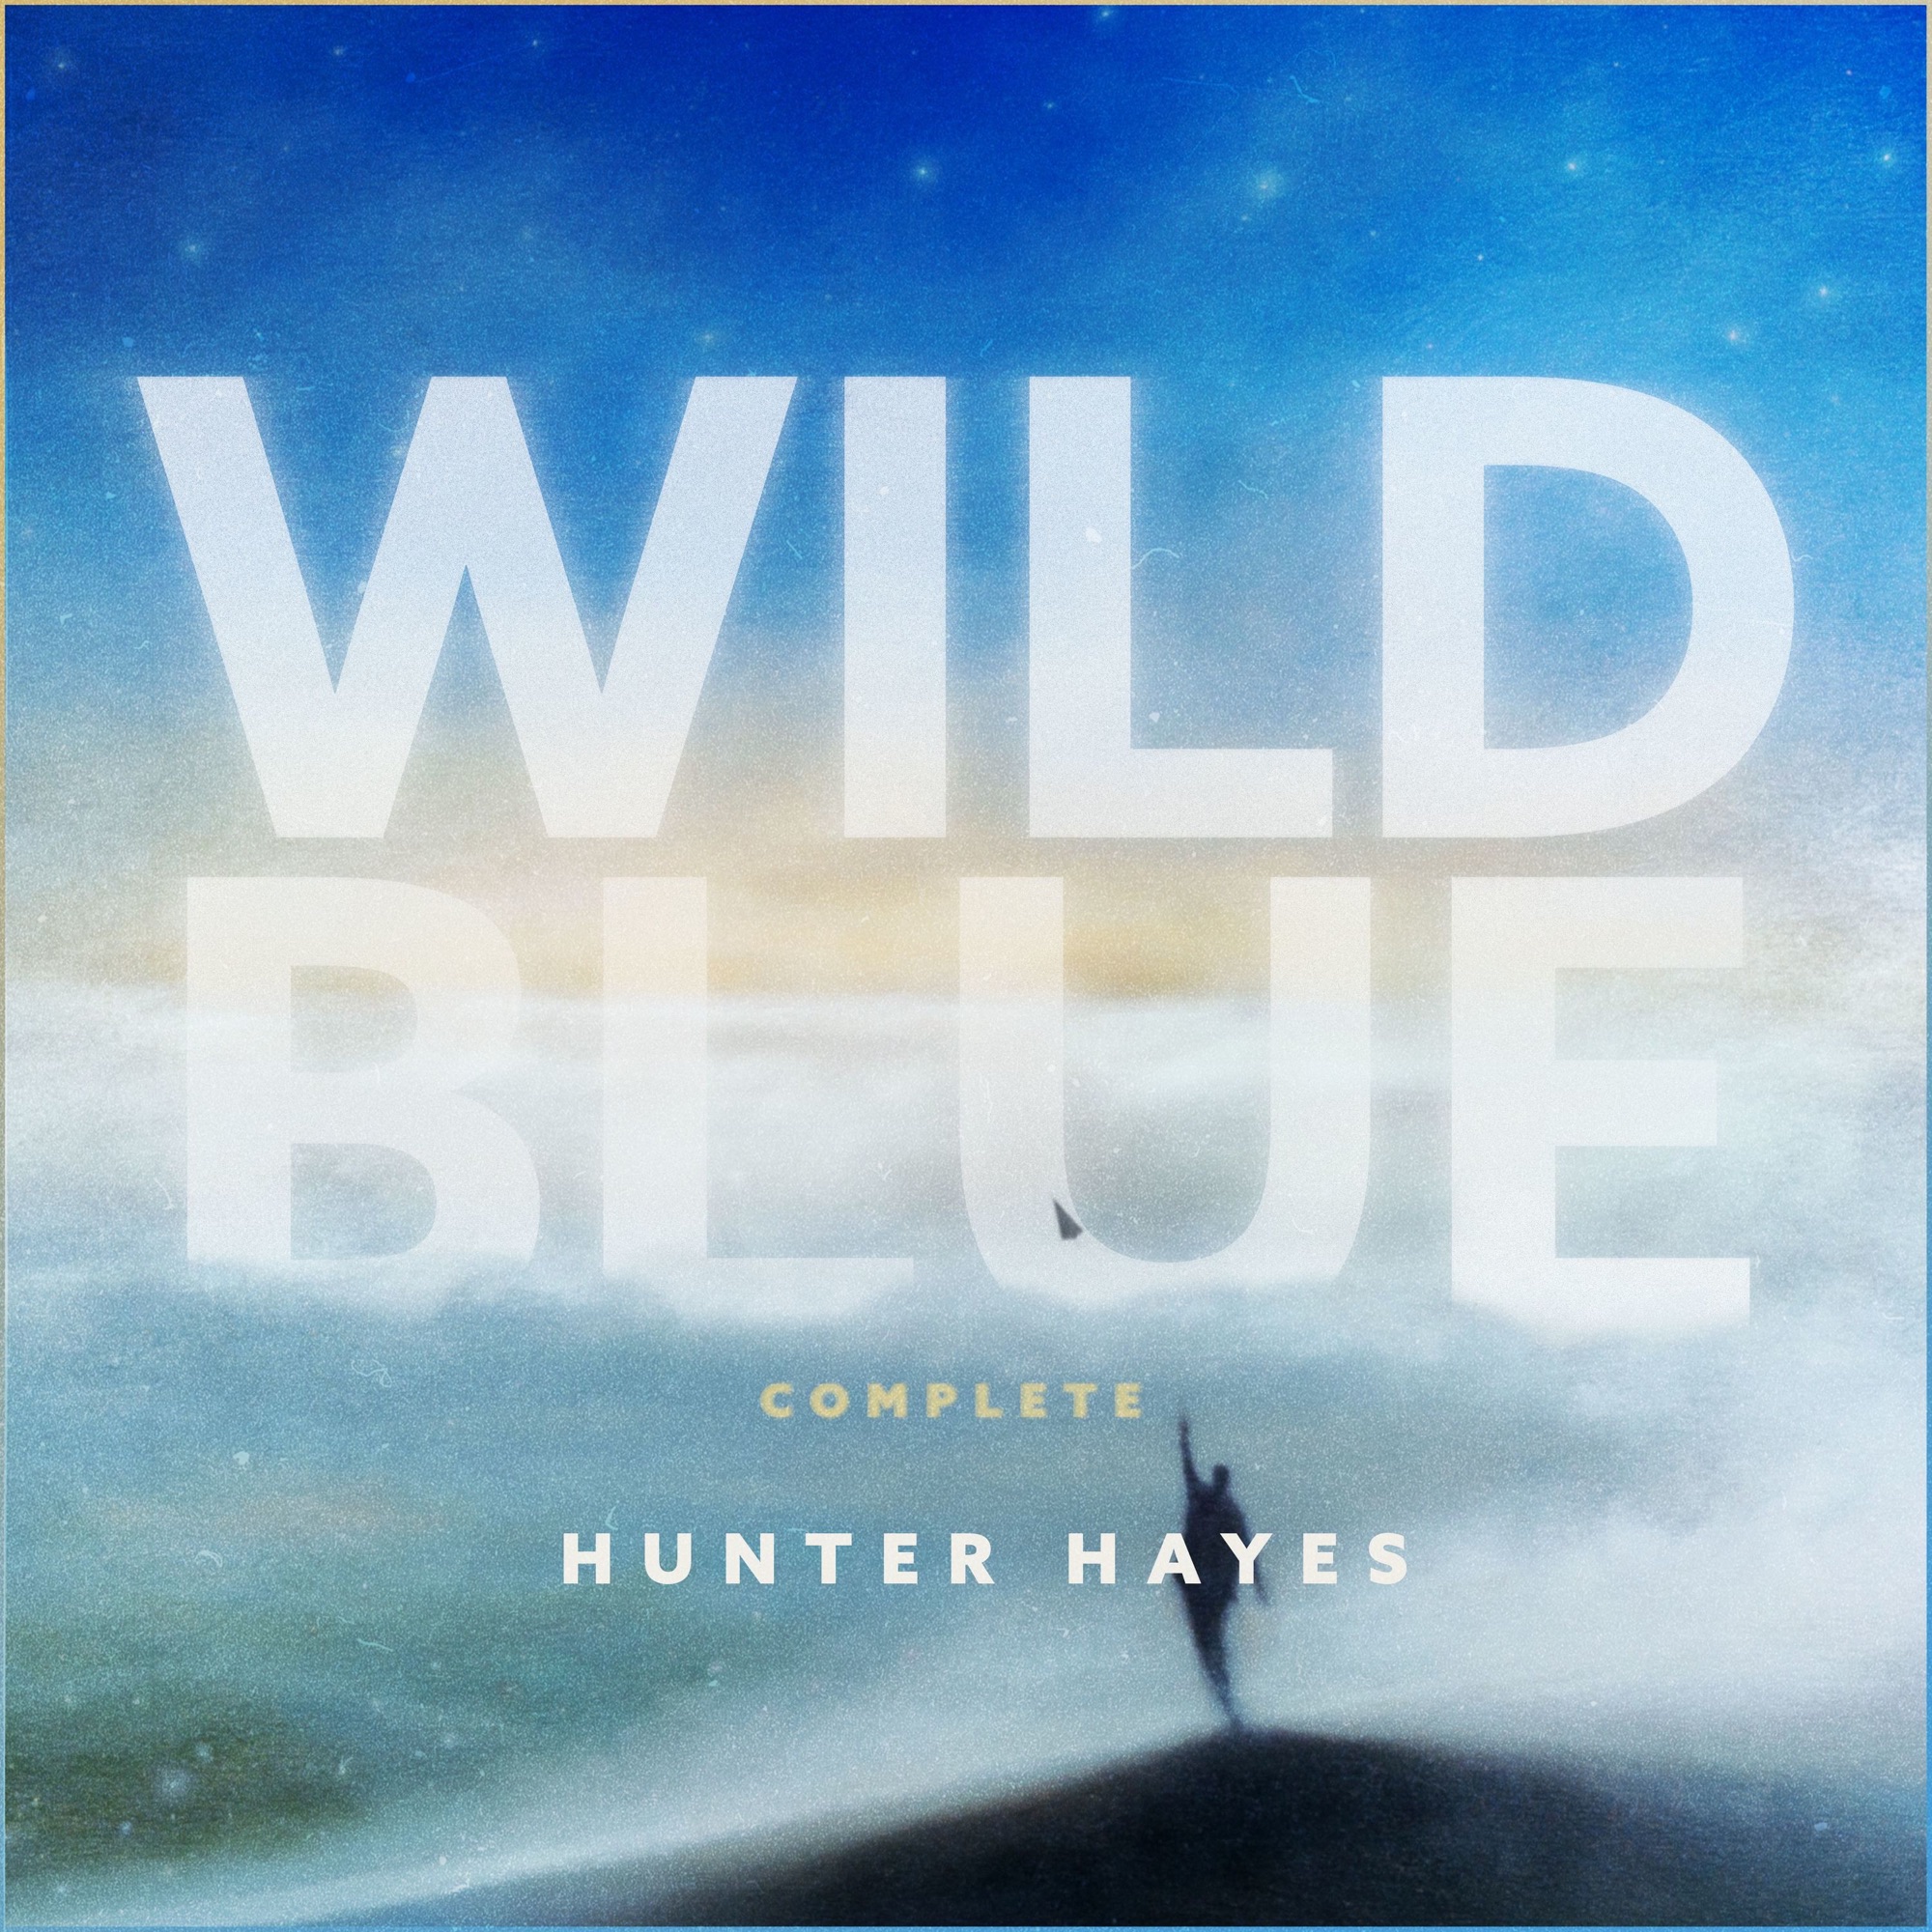 Hunter Hayes Wild Blue (Complete) cover artwork